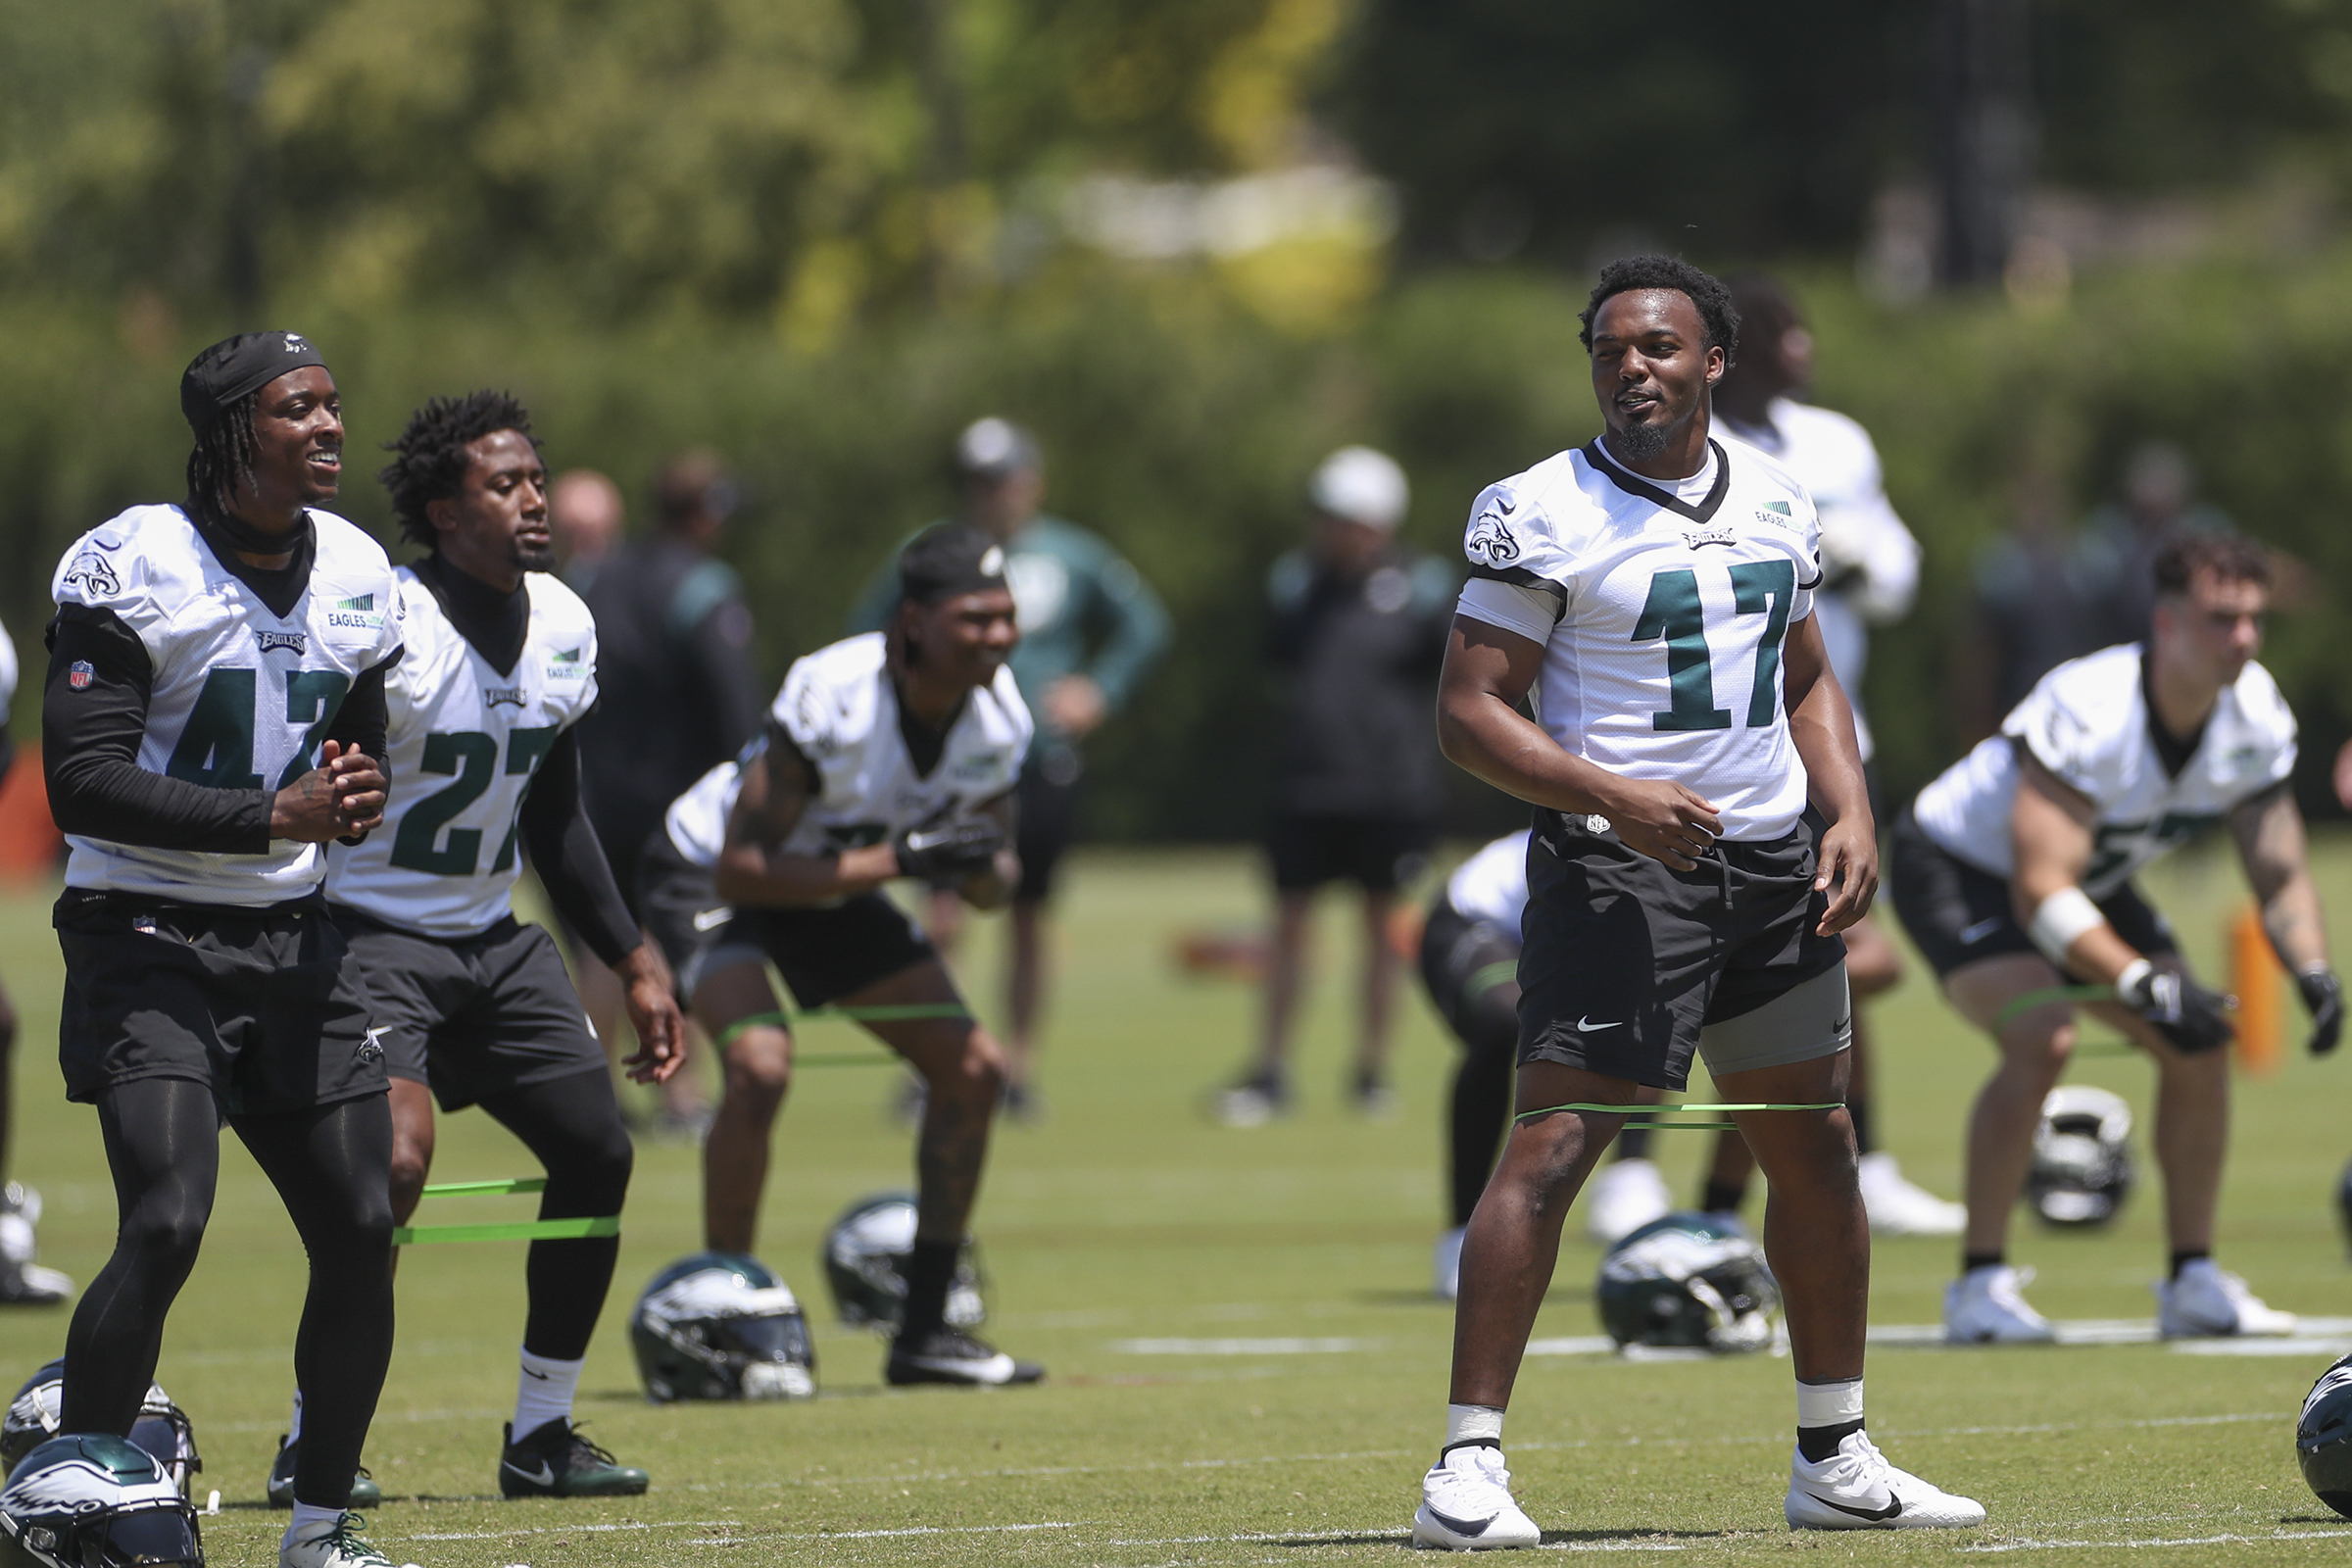 Eagles sign offensive lineman, training camp standout, to 2-year